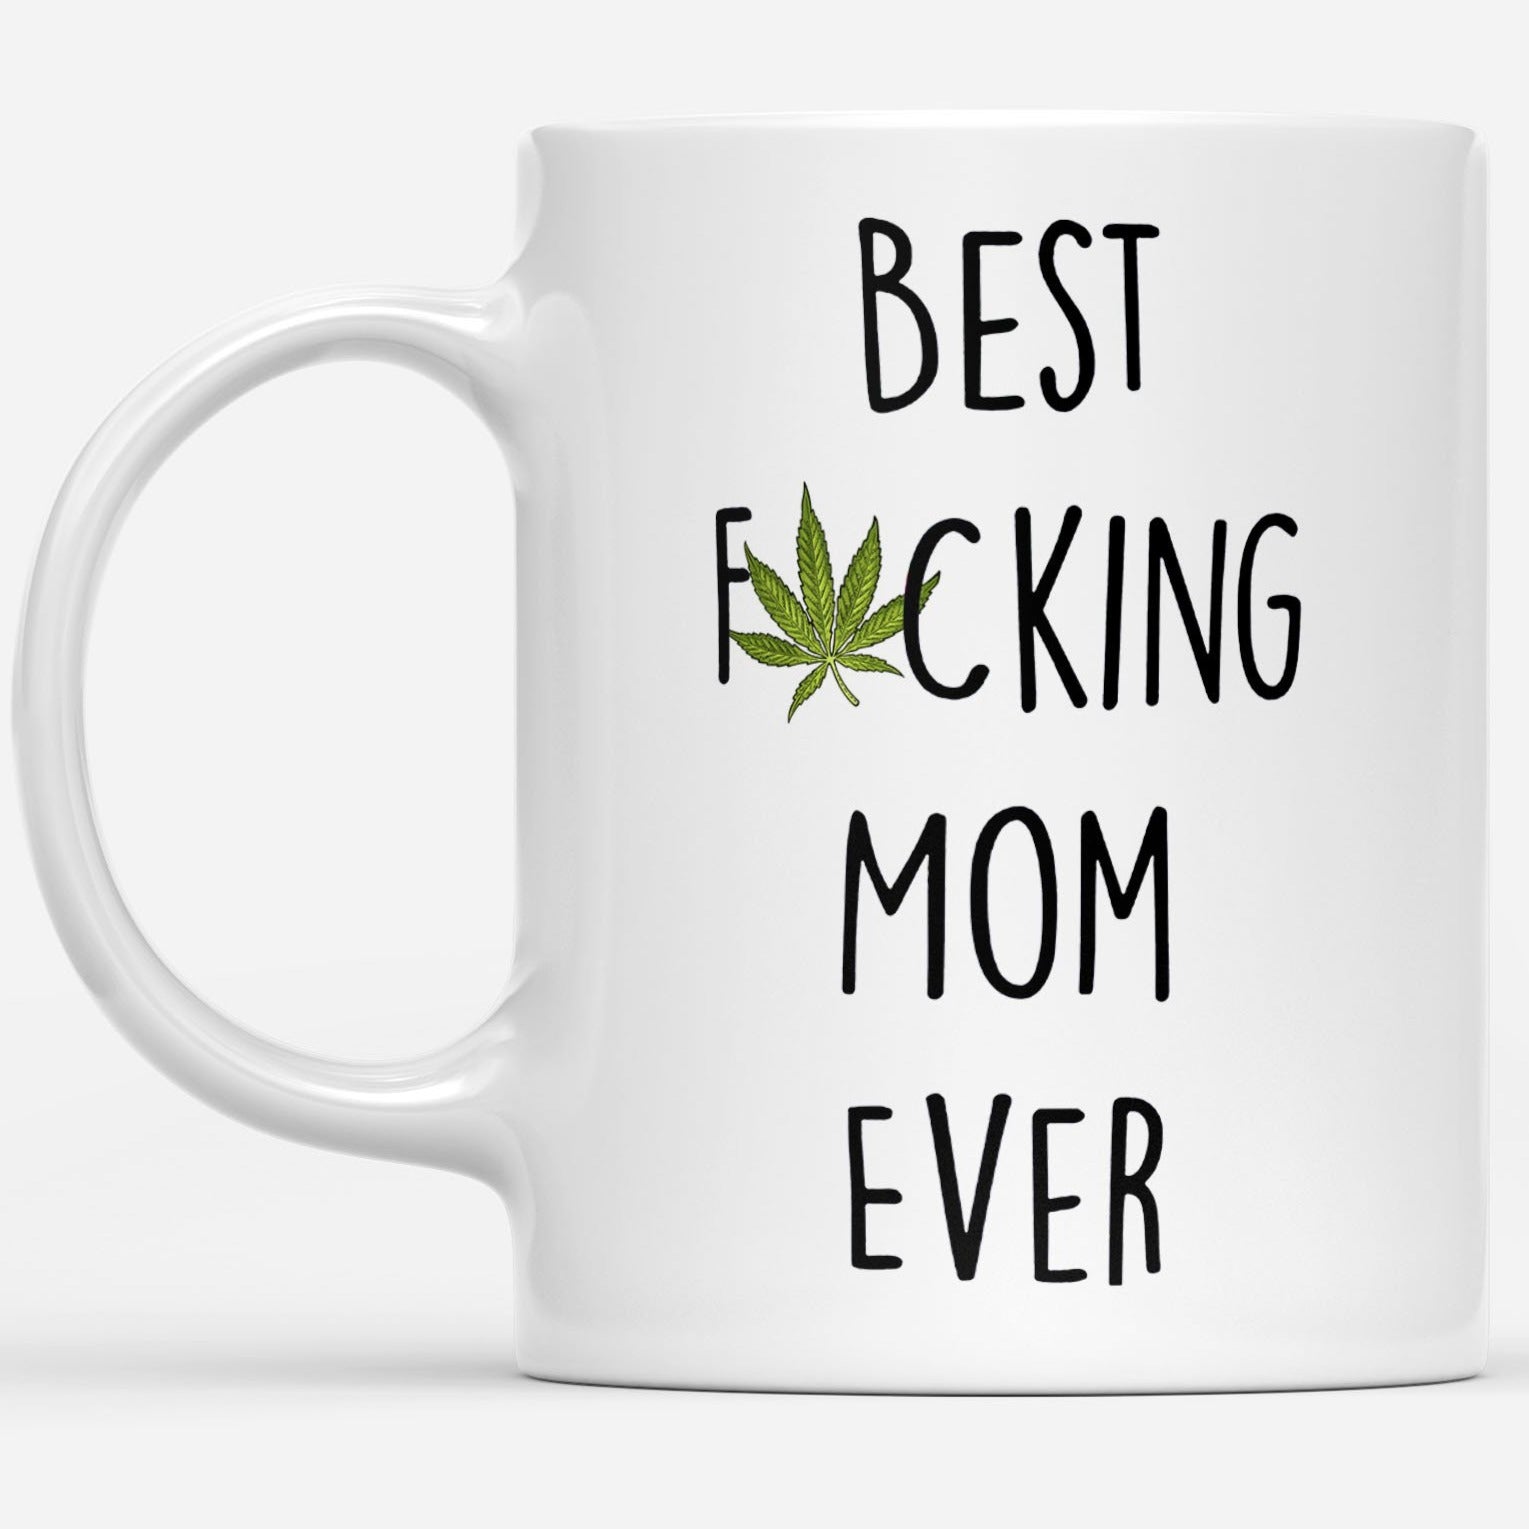 Best F 420 Mom Ever Funny Gift Ideas for Mothers Day DS White Mug